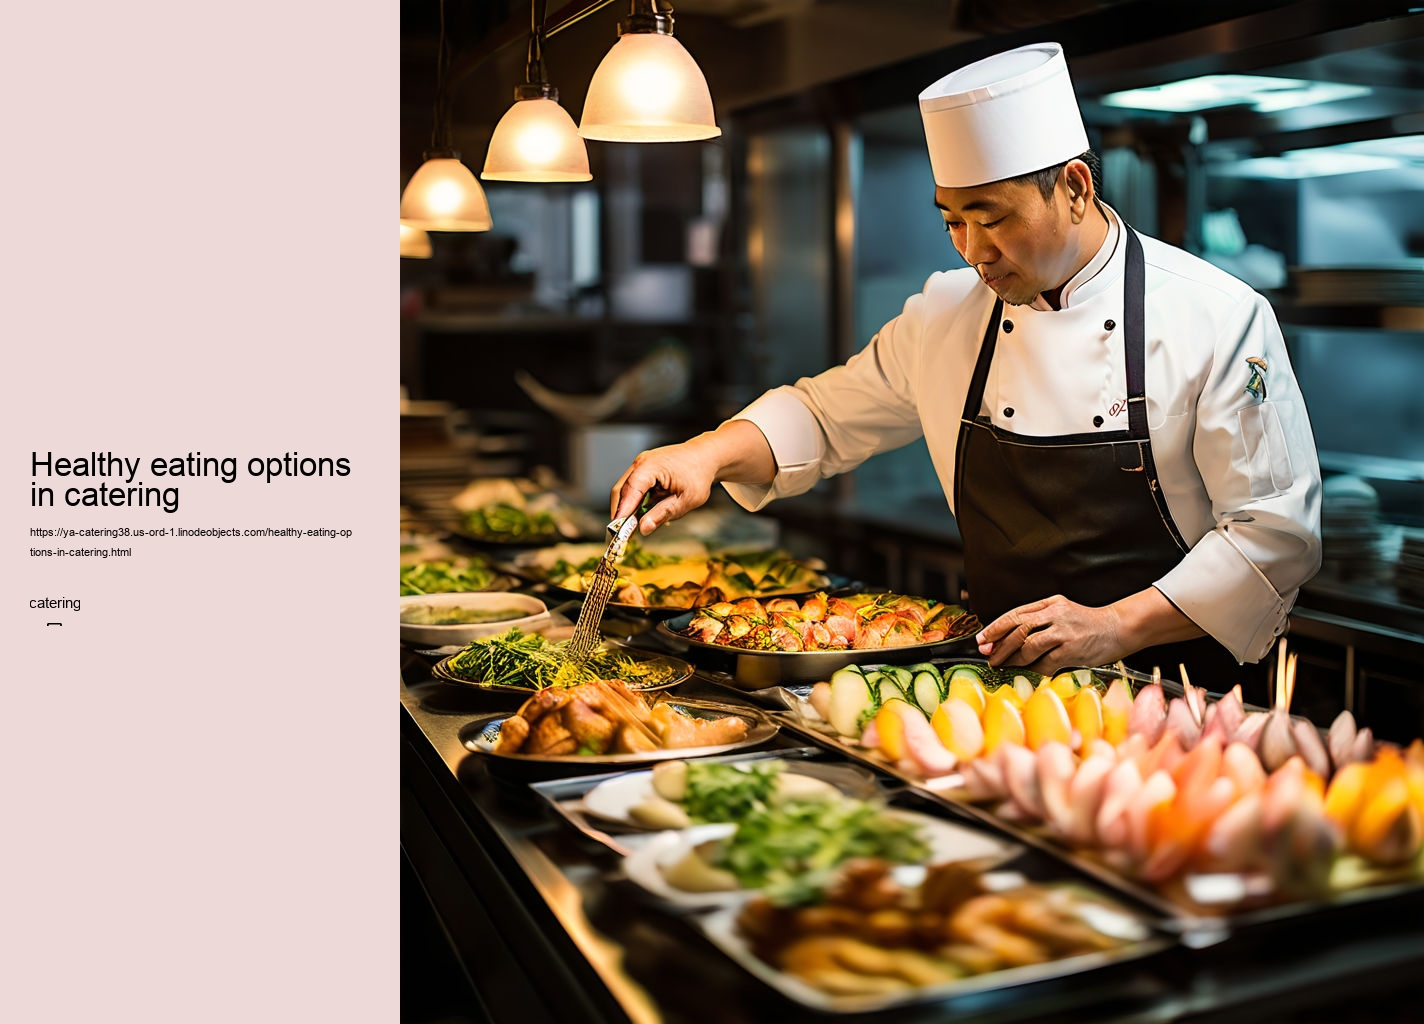 Healthy eating options in catering